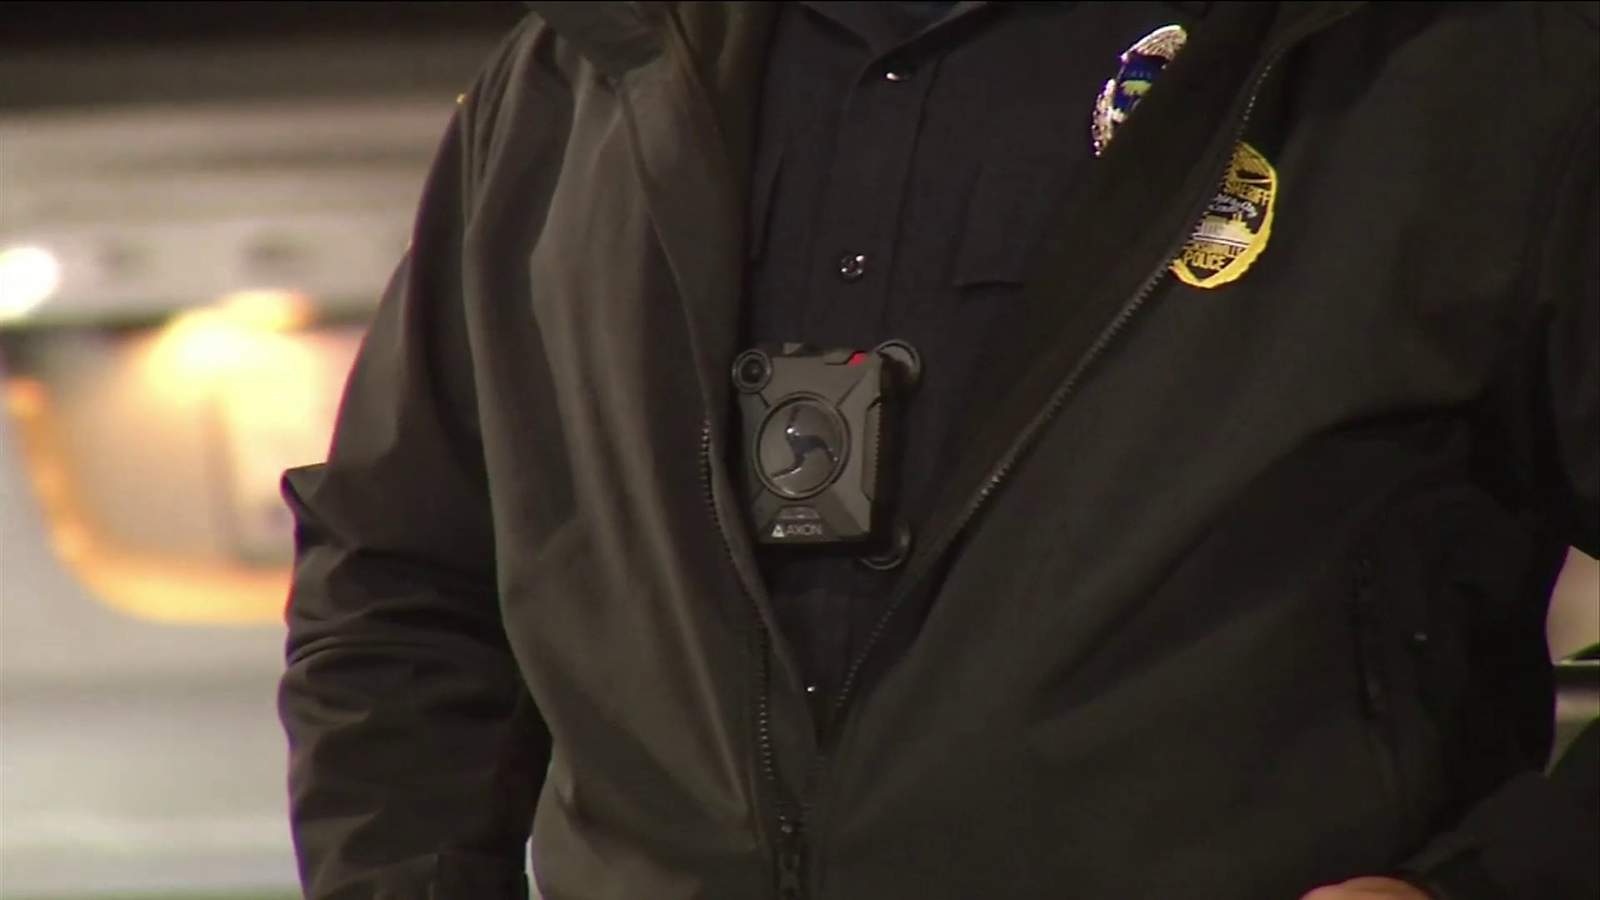 New policy on police bodycam video to be put in place soon in Jacksonville